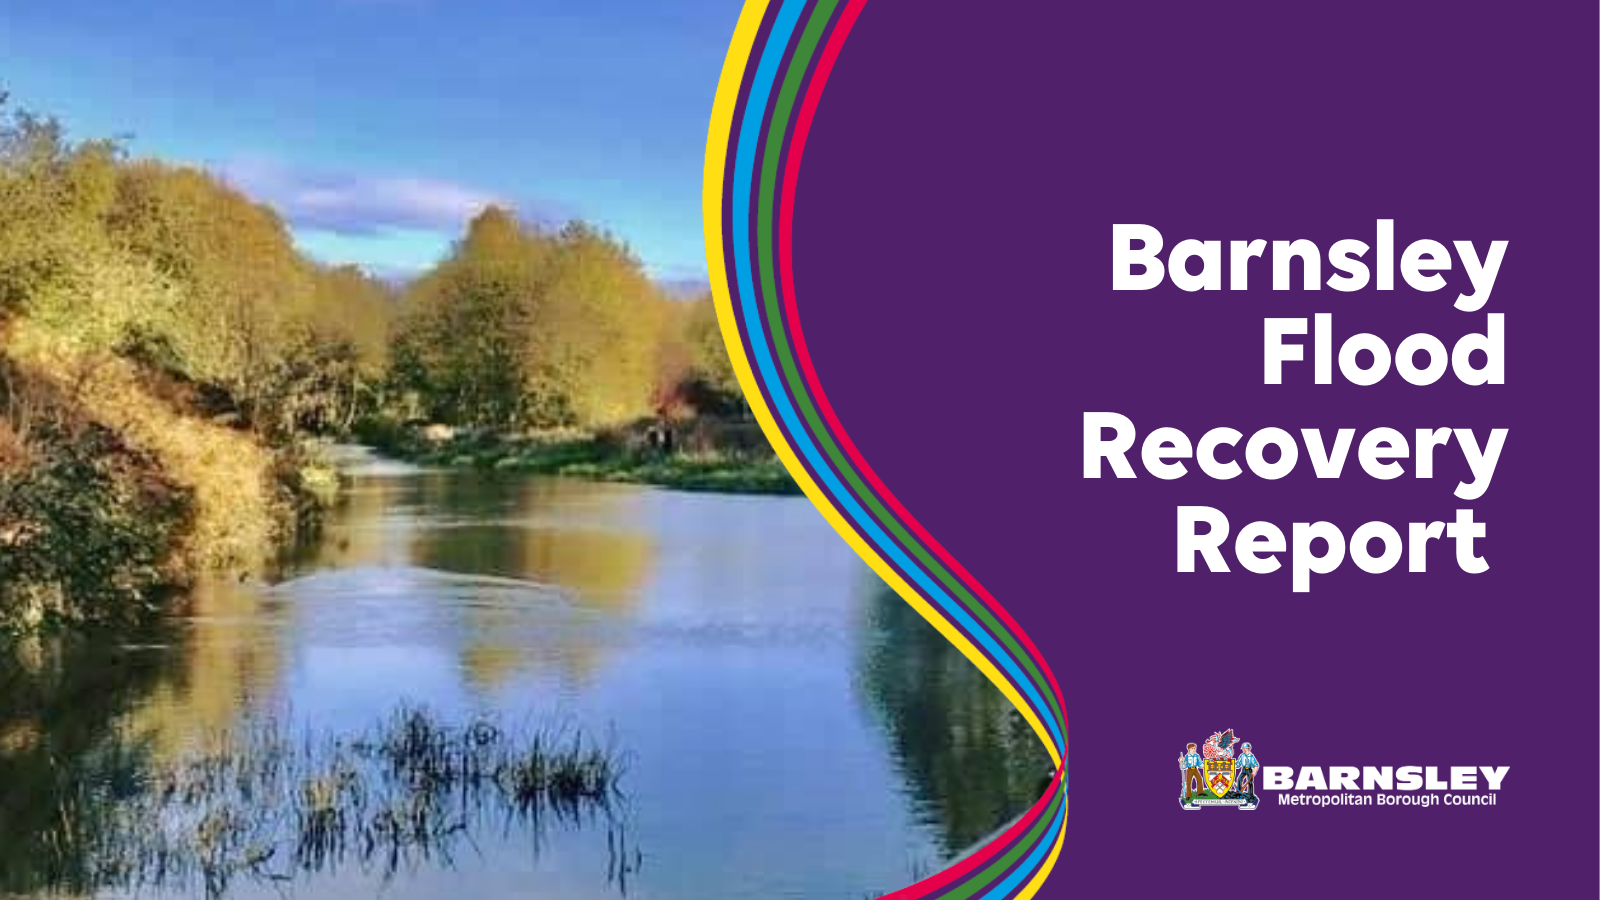 Barnsley flood recovery report